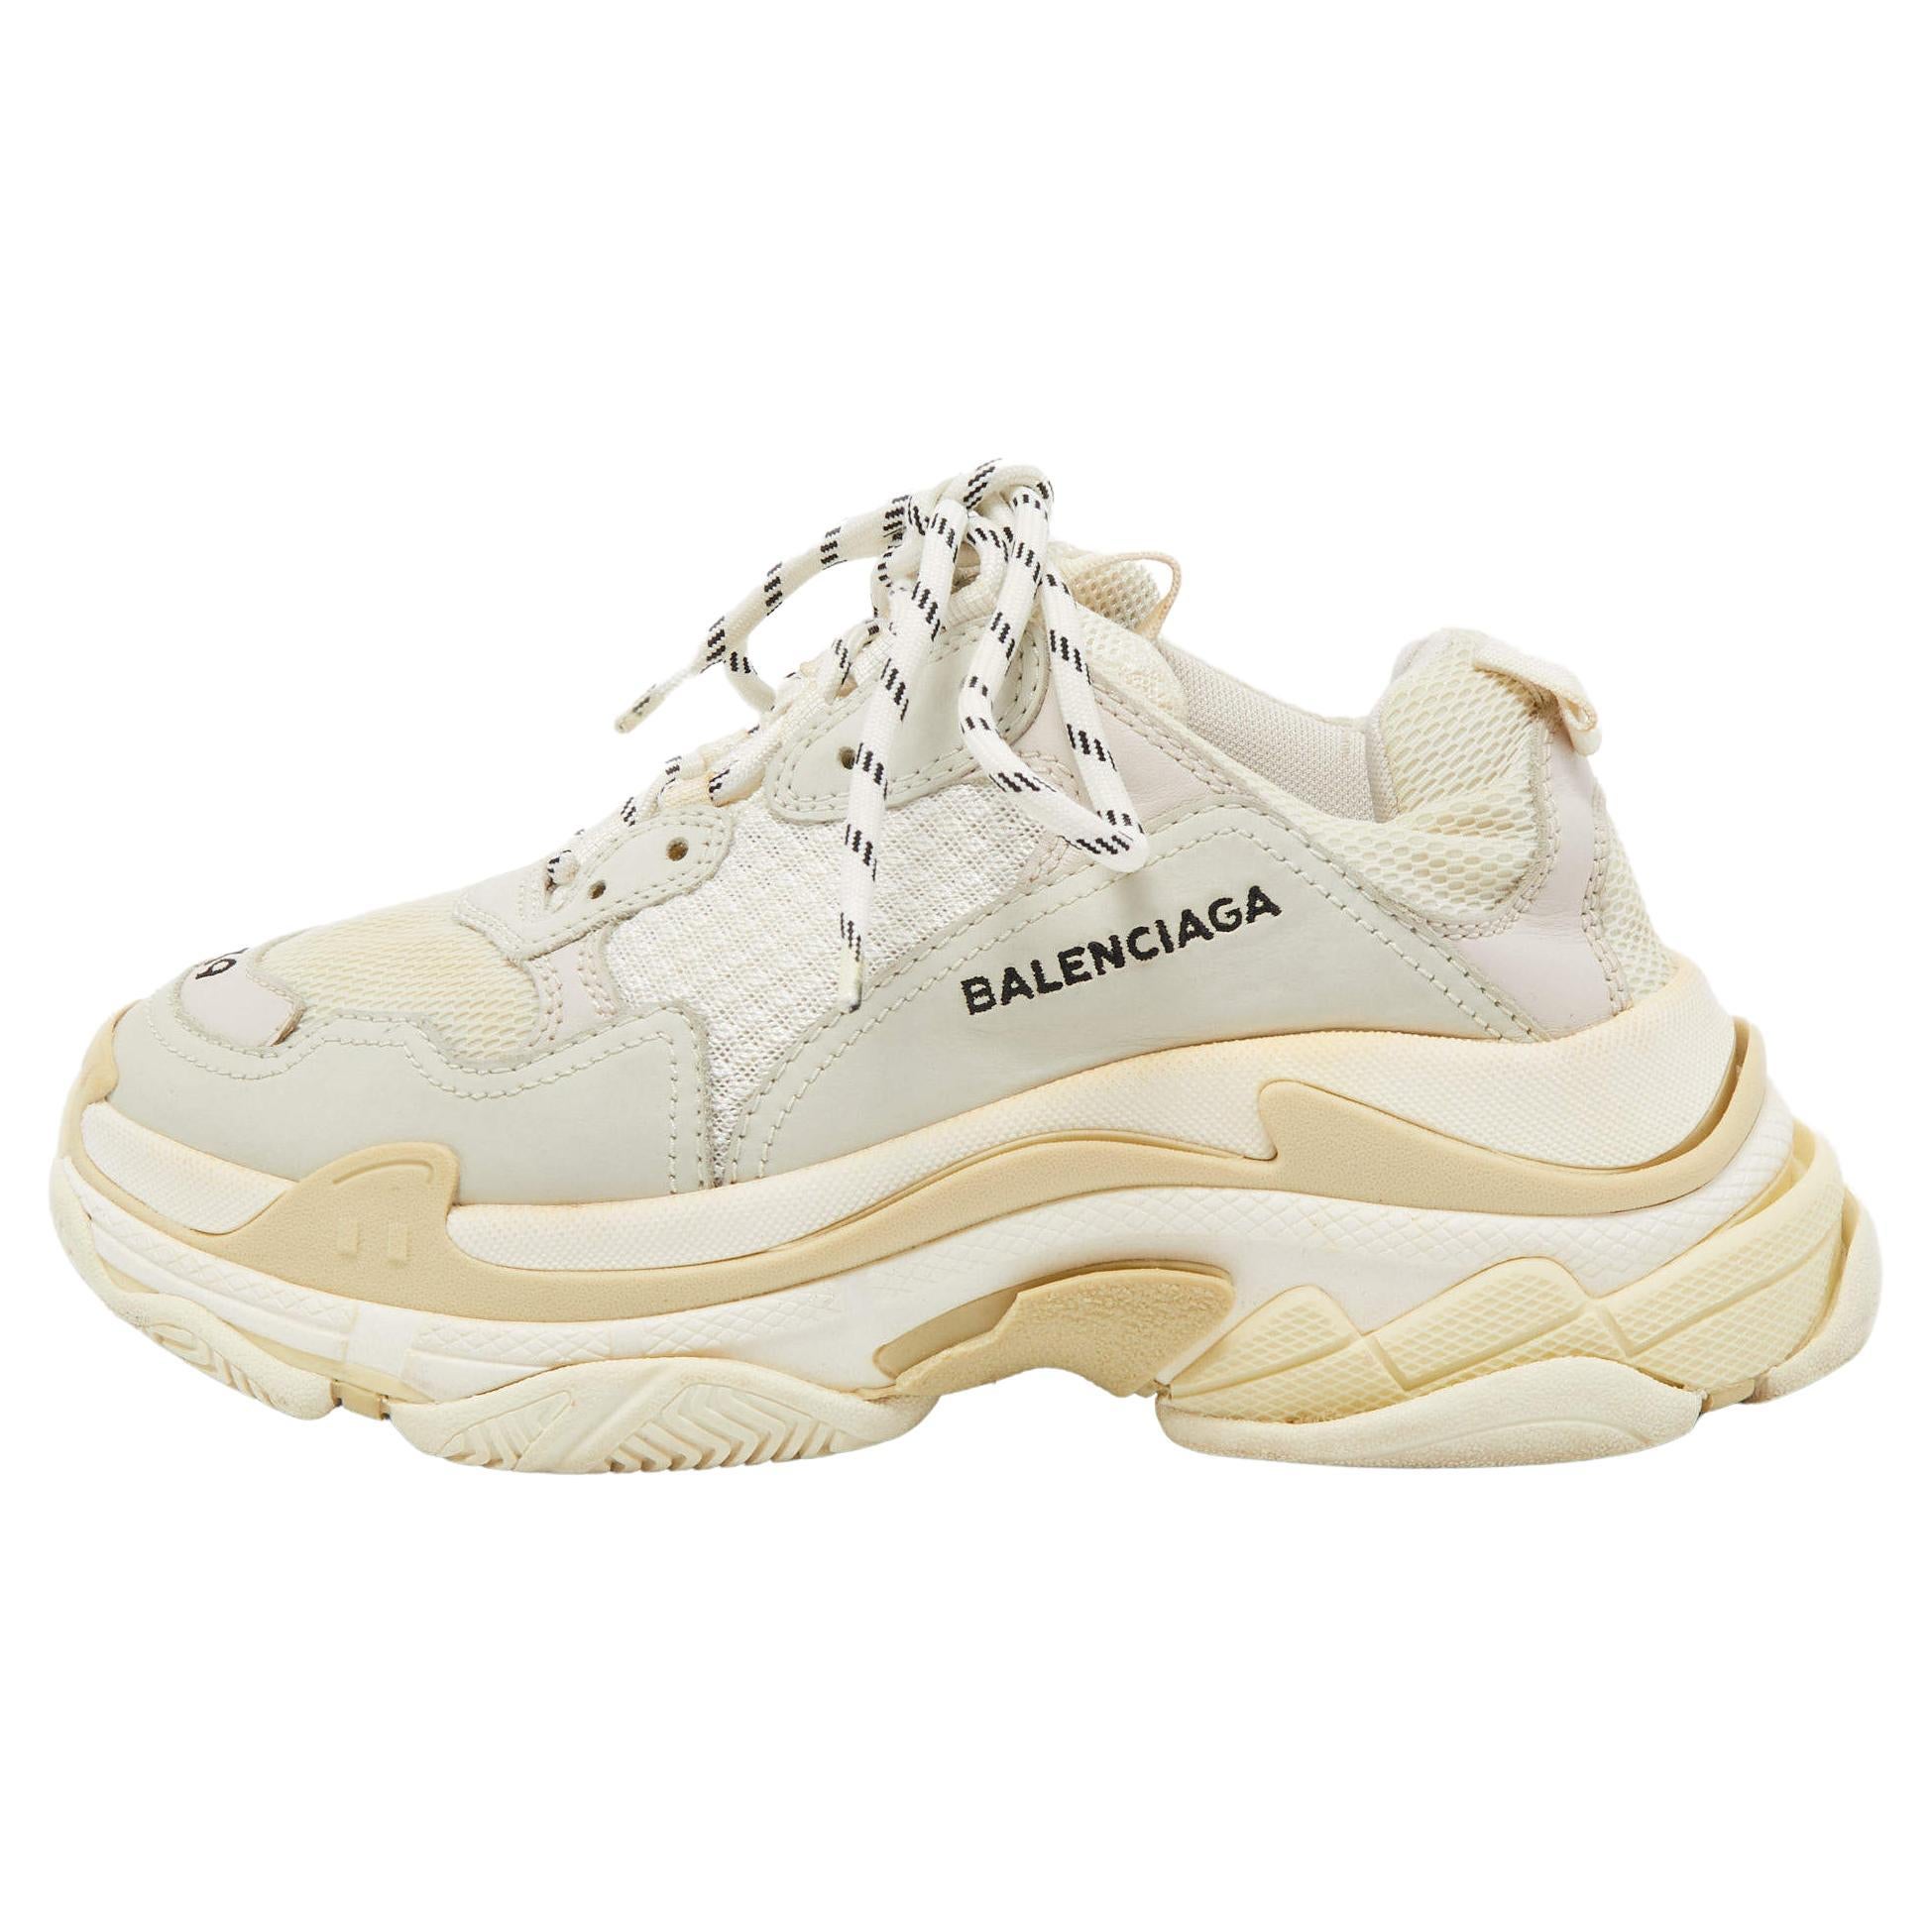 Balenciaga White/Grey Mesh and Nubuck Leather Triple S Sneakers Size 39 For Sale